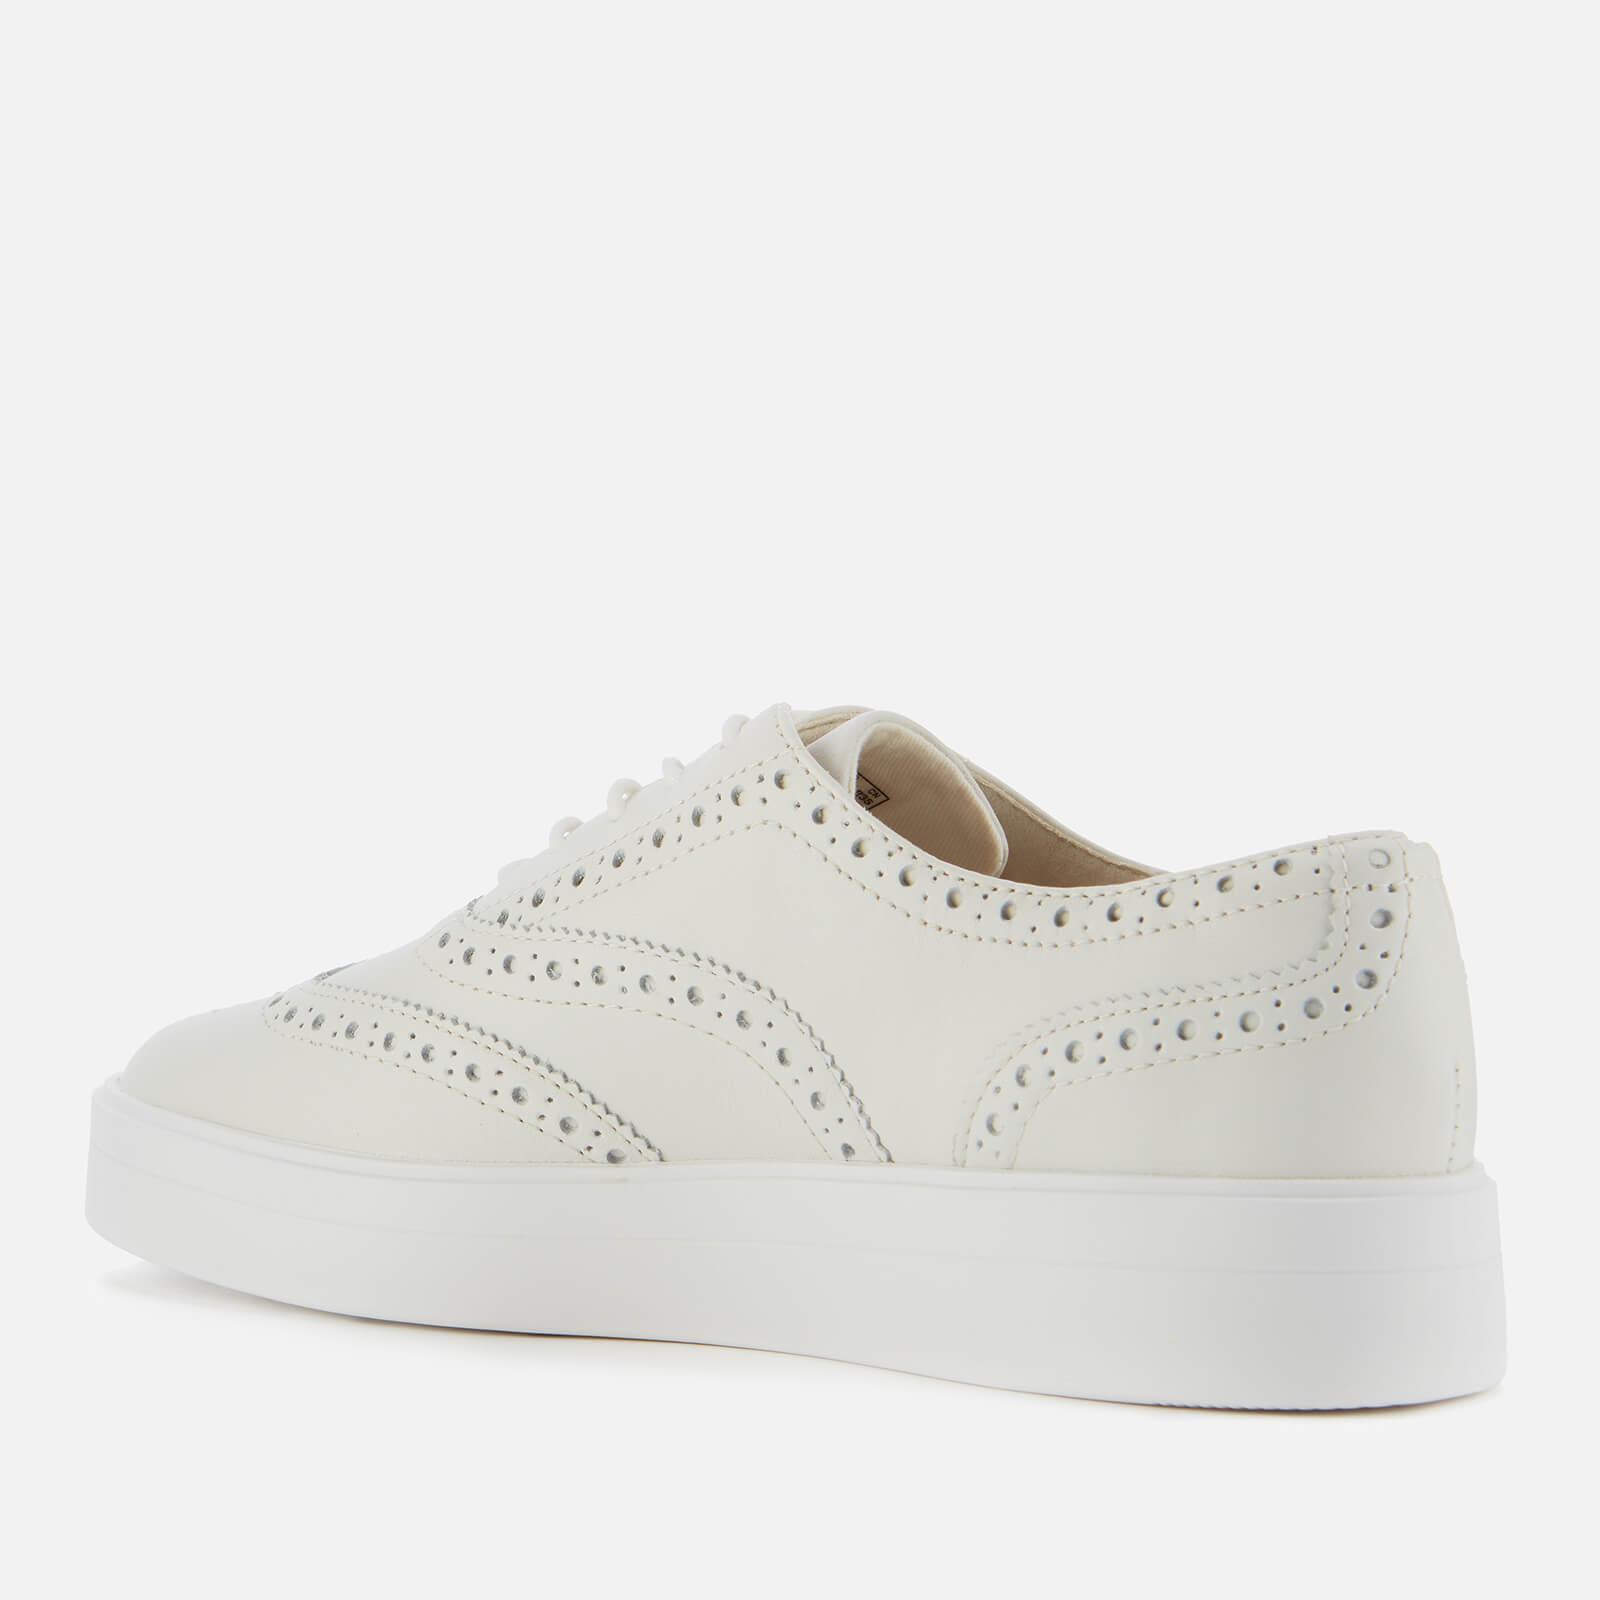 Clarks Hero Leather Brogue Trainers in White - Lyst